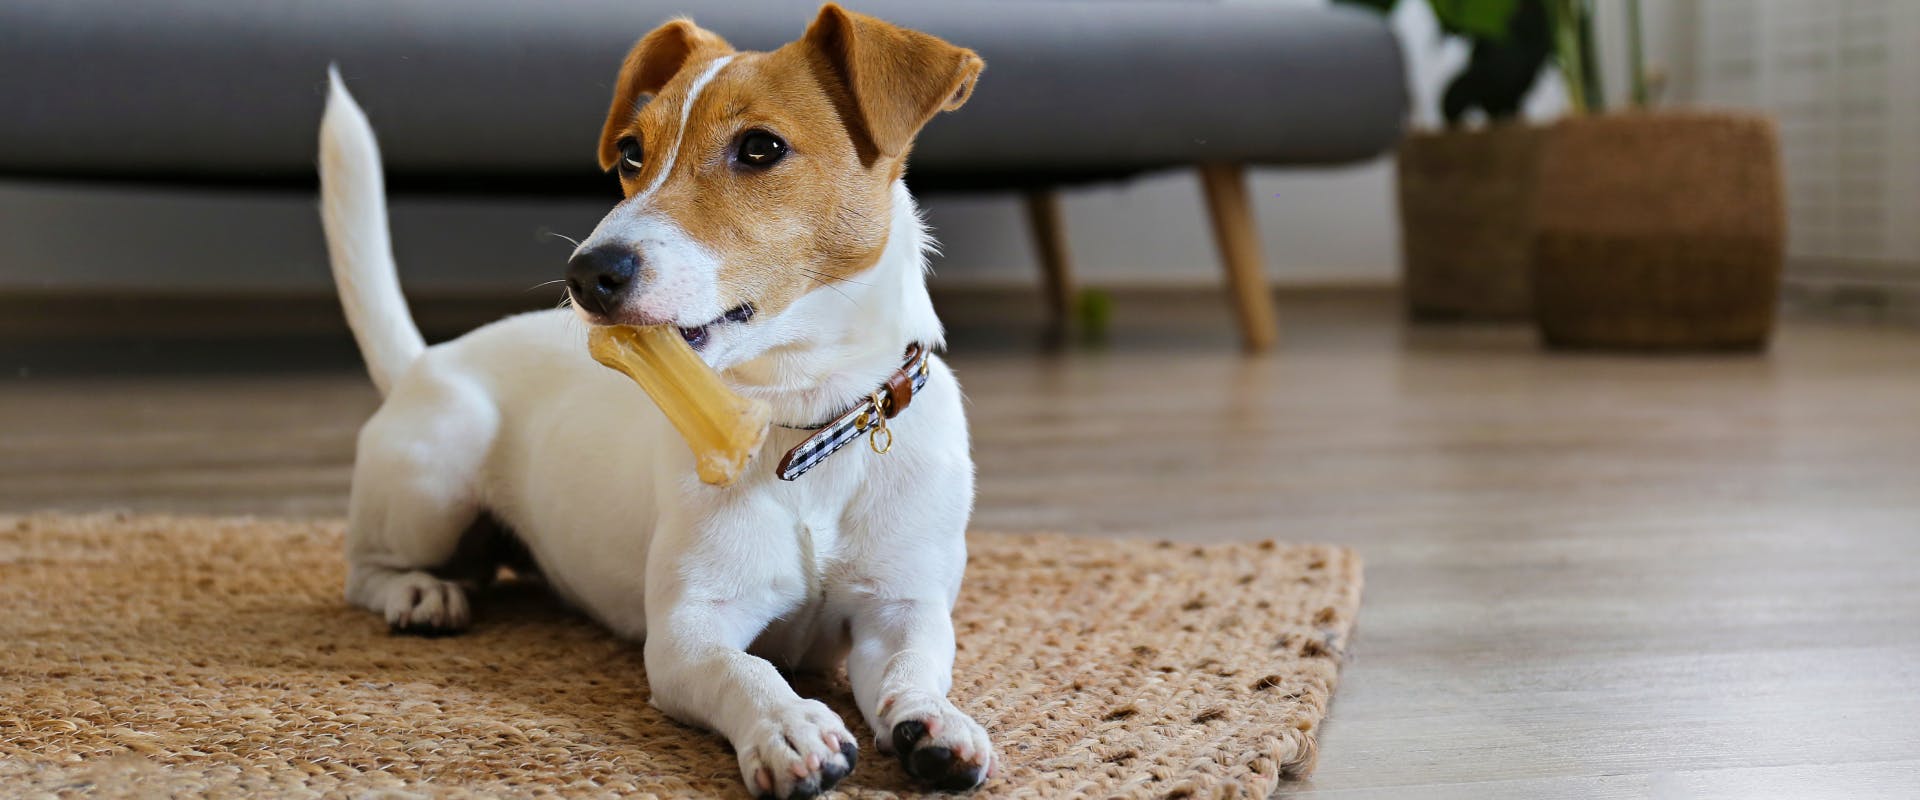 jack russel terrier lying on a rug with a bone in its mouth